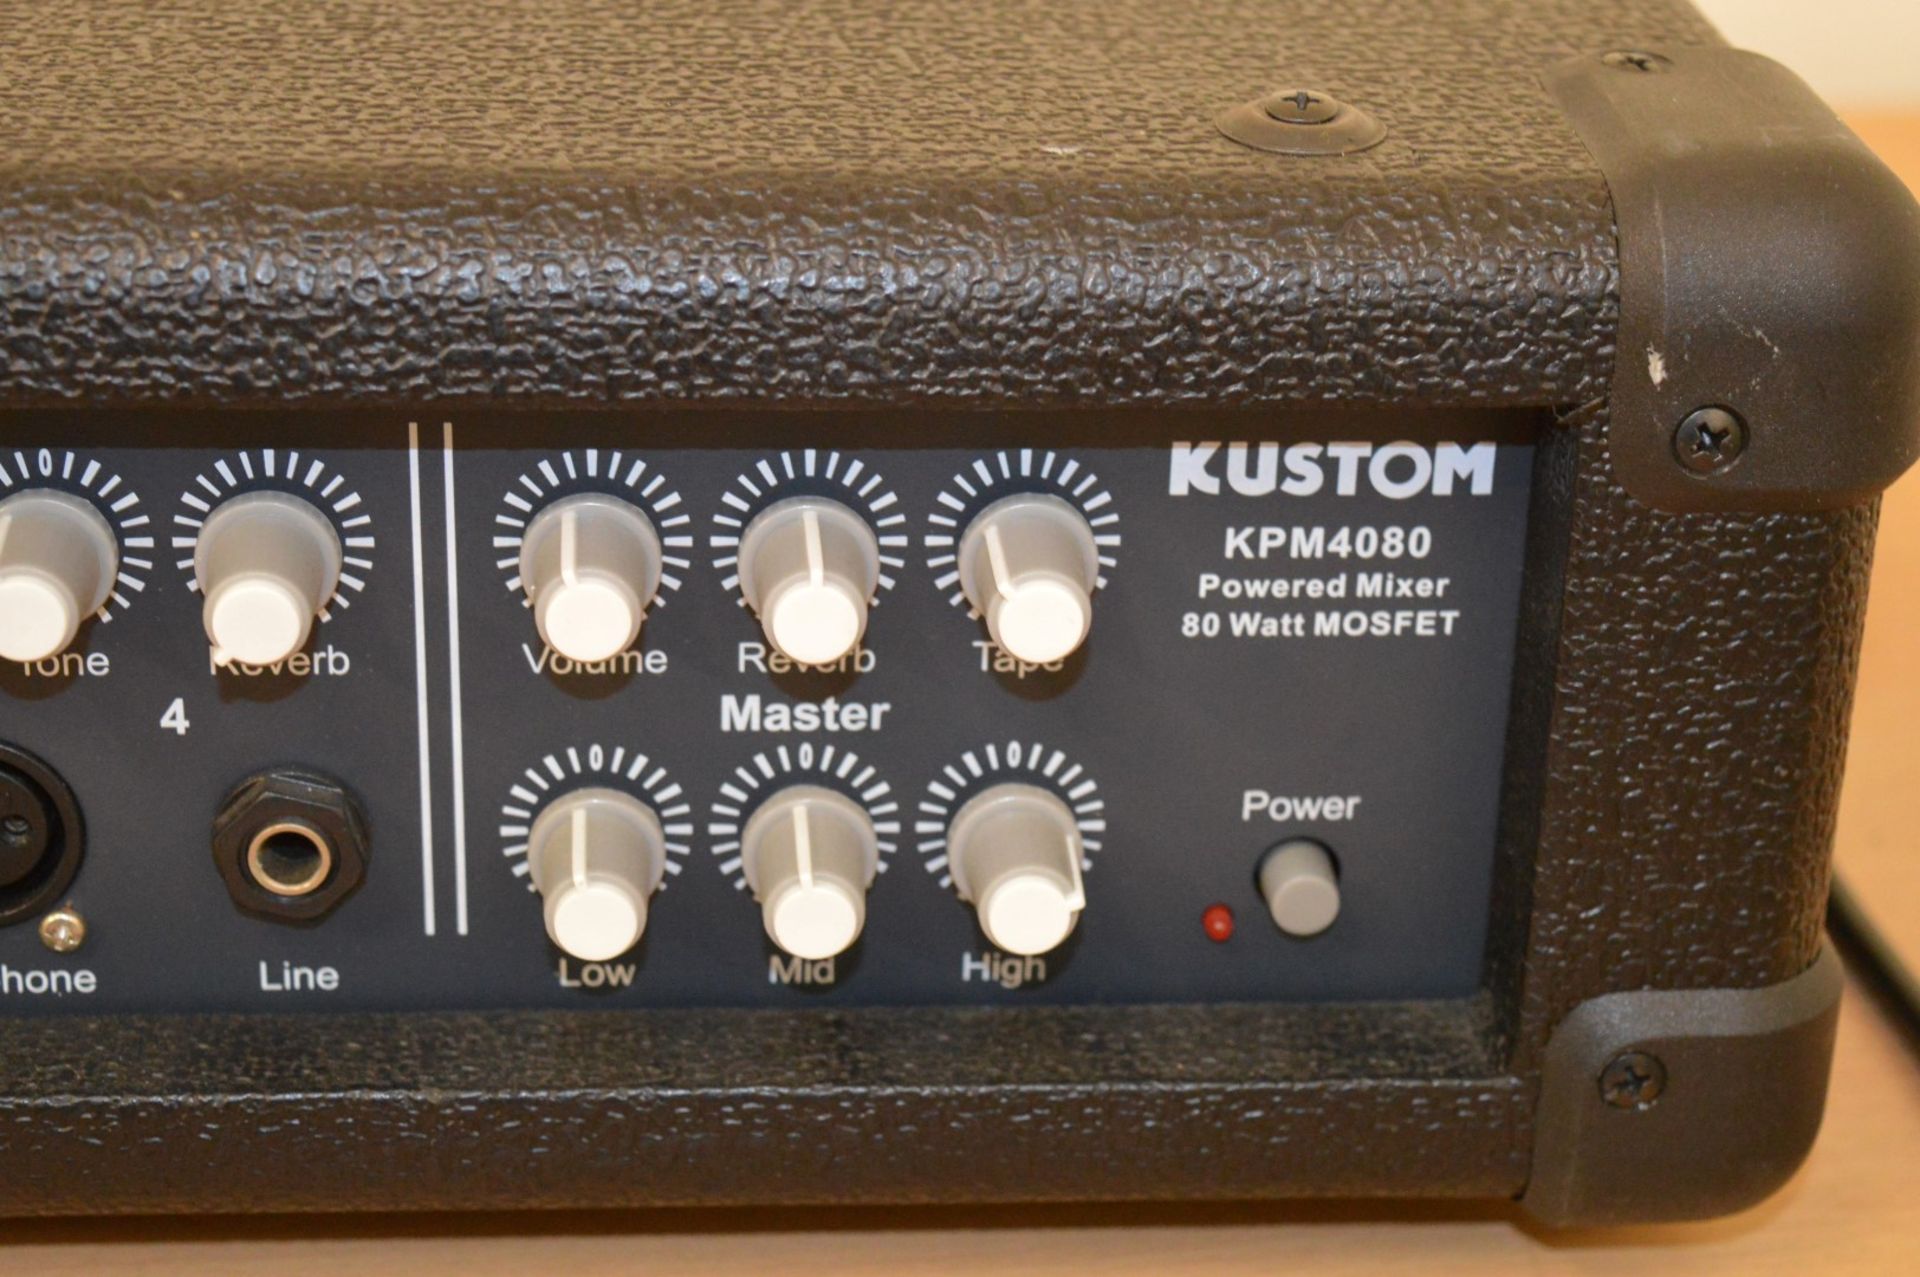 1 x Kustom KPM 4080 Powered Mixer MOSFET 80 Watt 4 Channel PA Amplifier - Unused Stock - Ideal For - Image 4 of 7